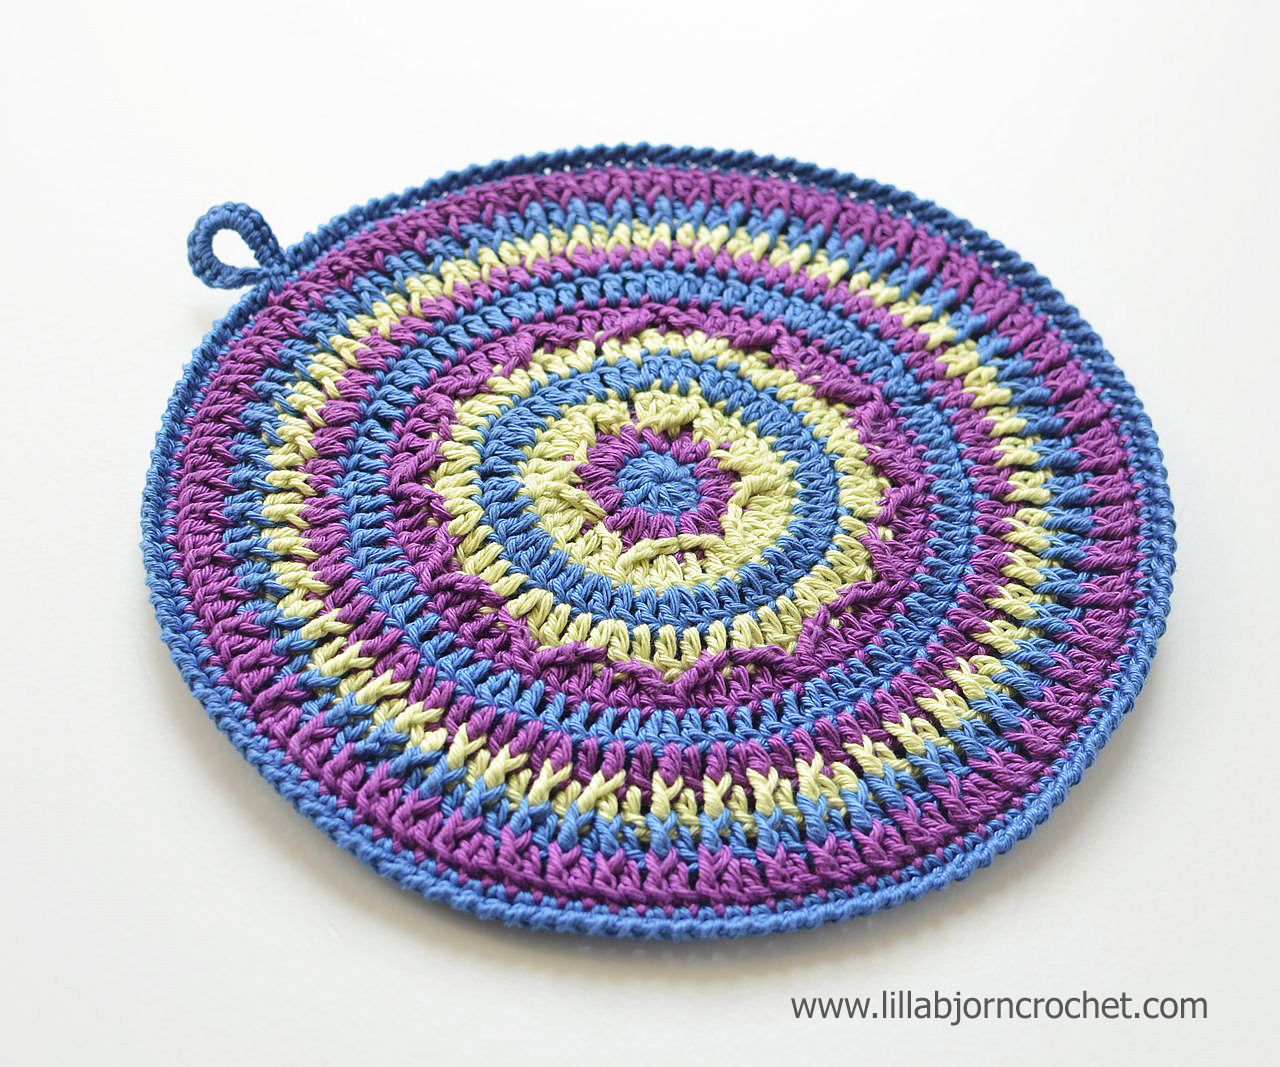 Northern Lights Potholder. A very easy to follow FREE pattern by Lilla Bjorn Crochet